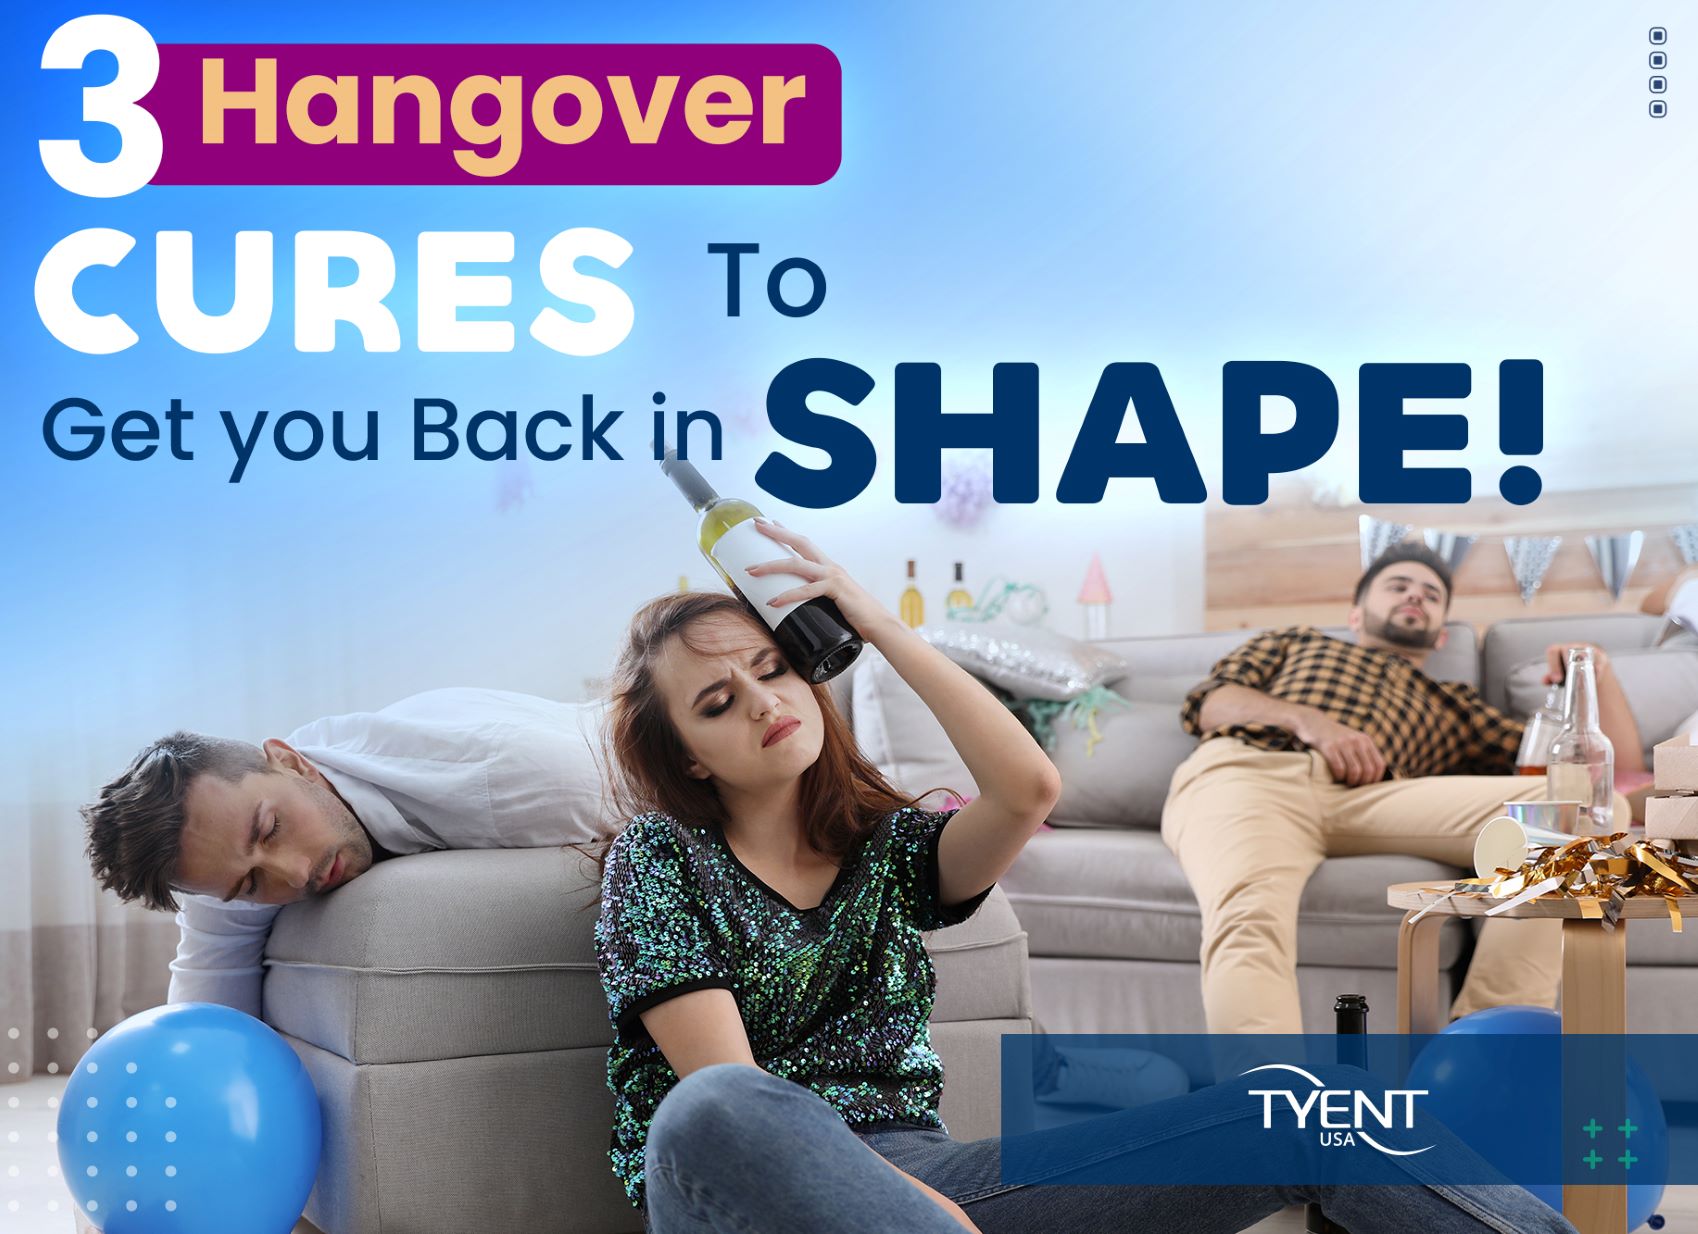 3 Hangover CURES To Get You Back in Shape